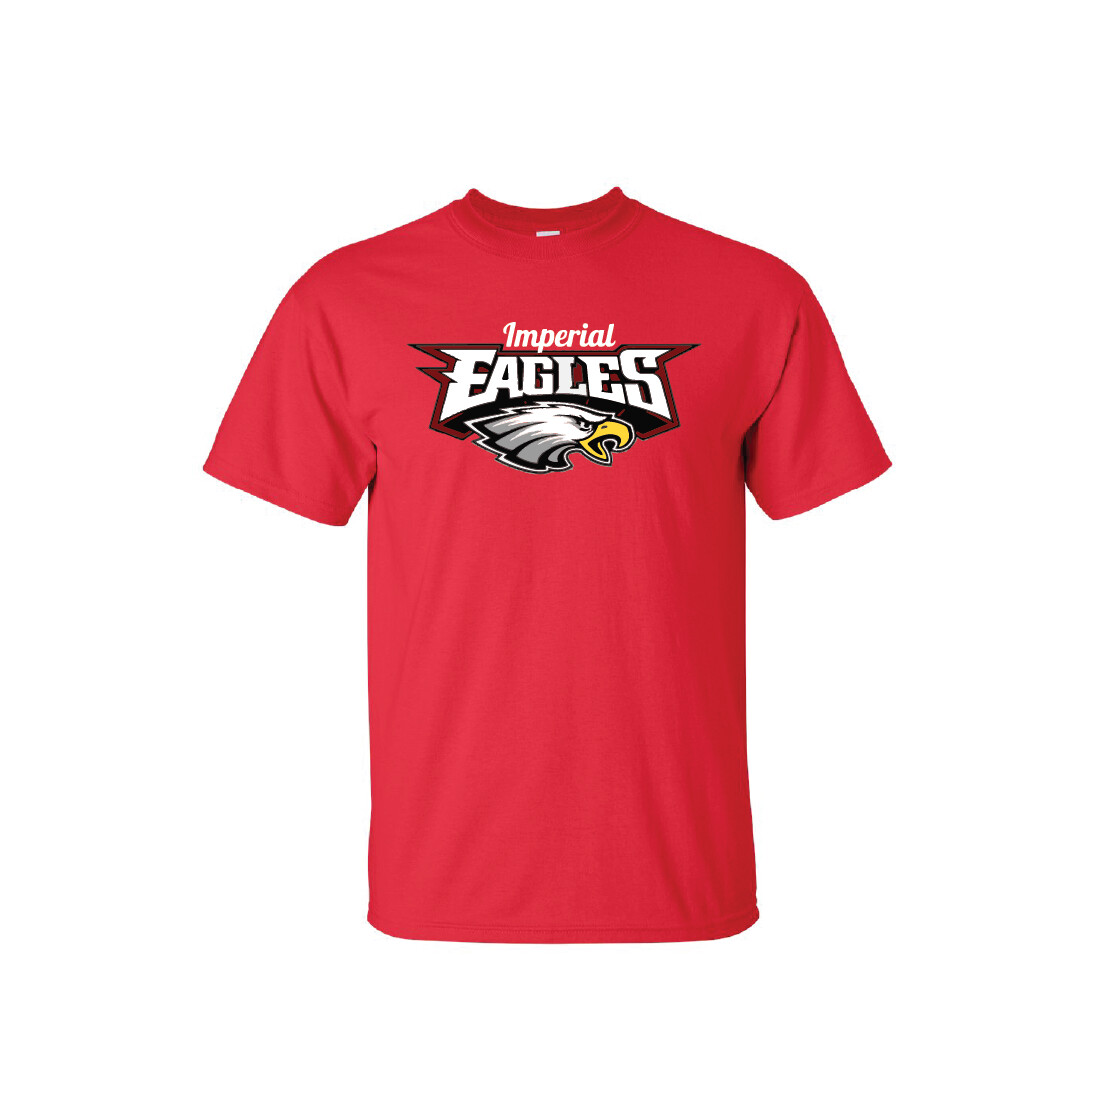 Imperial Eagles T-Shirt (Youth & Adult)